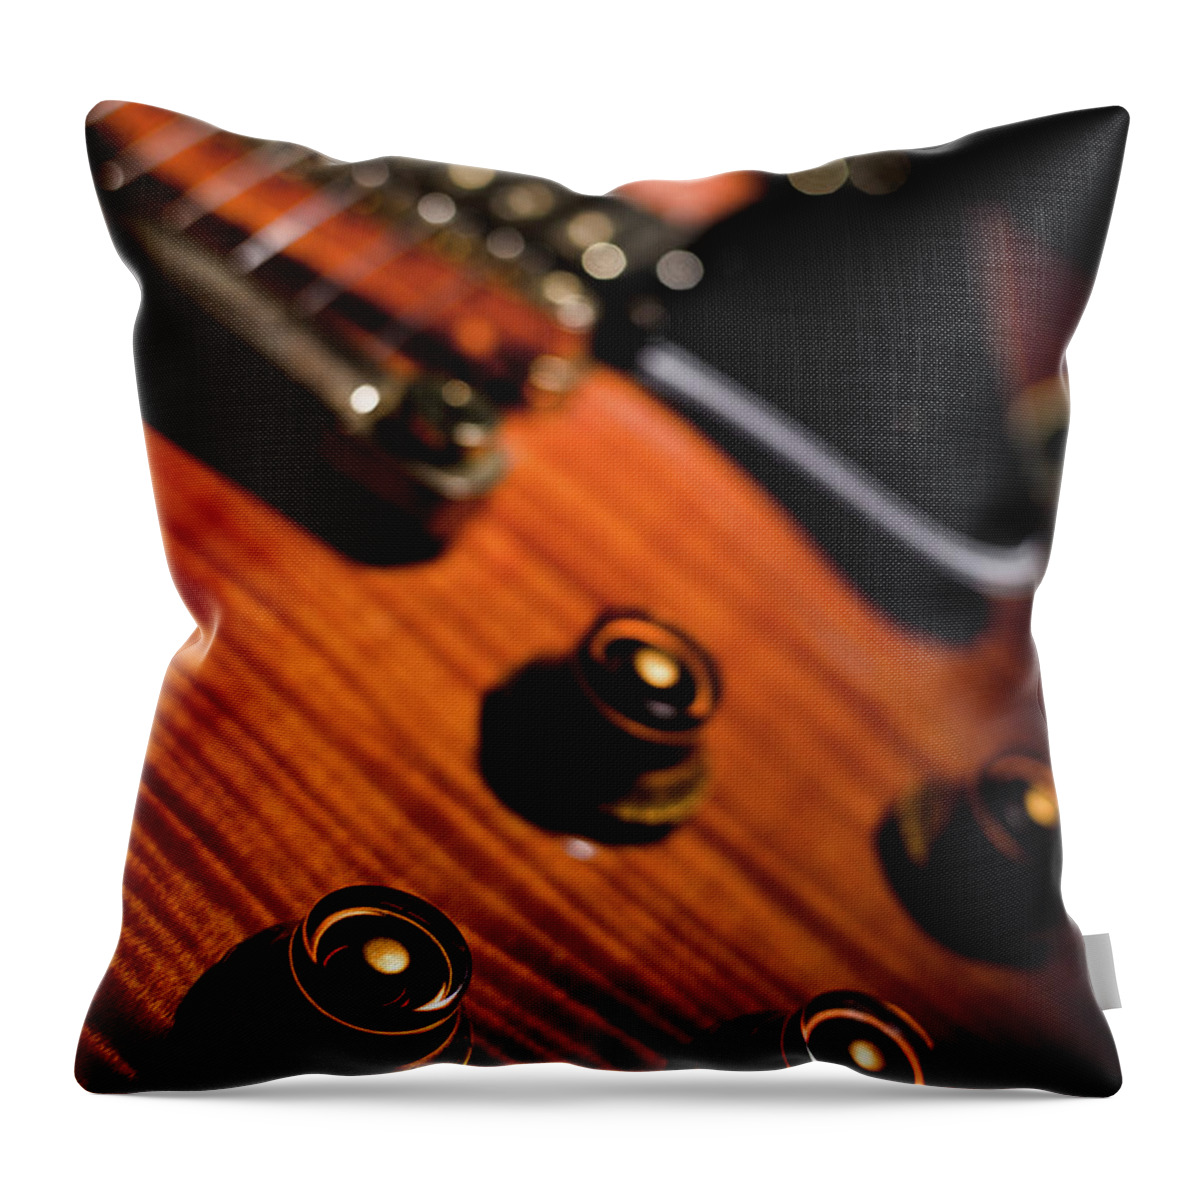 Les Paul Guitar Throw Pillow featuring the photograph Tune Into Focus by David Sutton